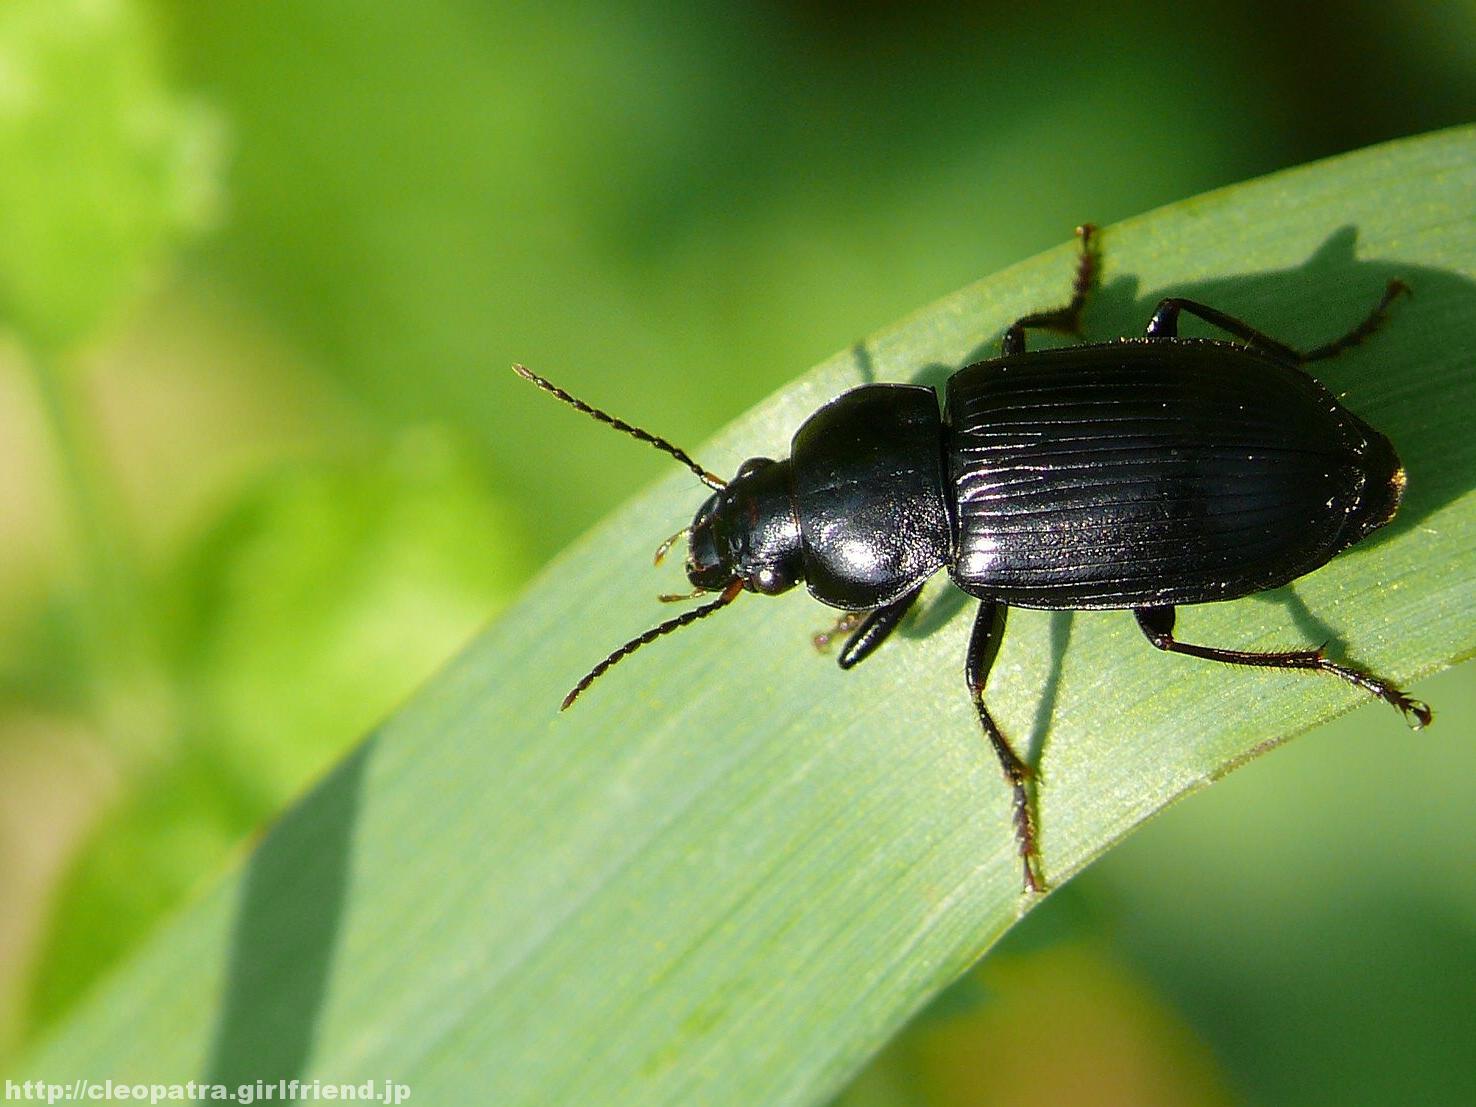 Ground Beetle 草むらを徘徊する黒いゴミムシ 2366s Insects Nature